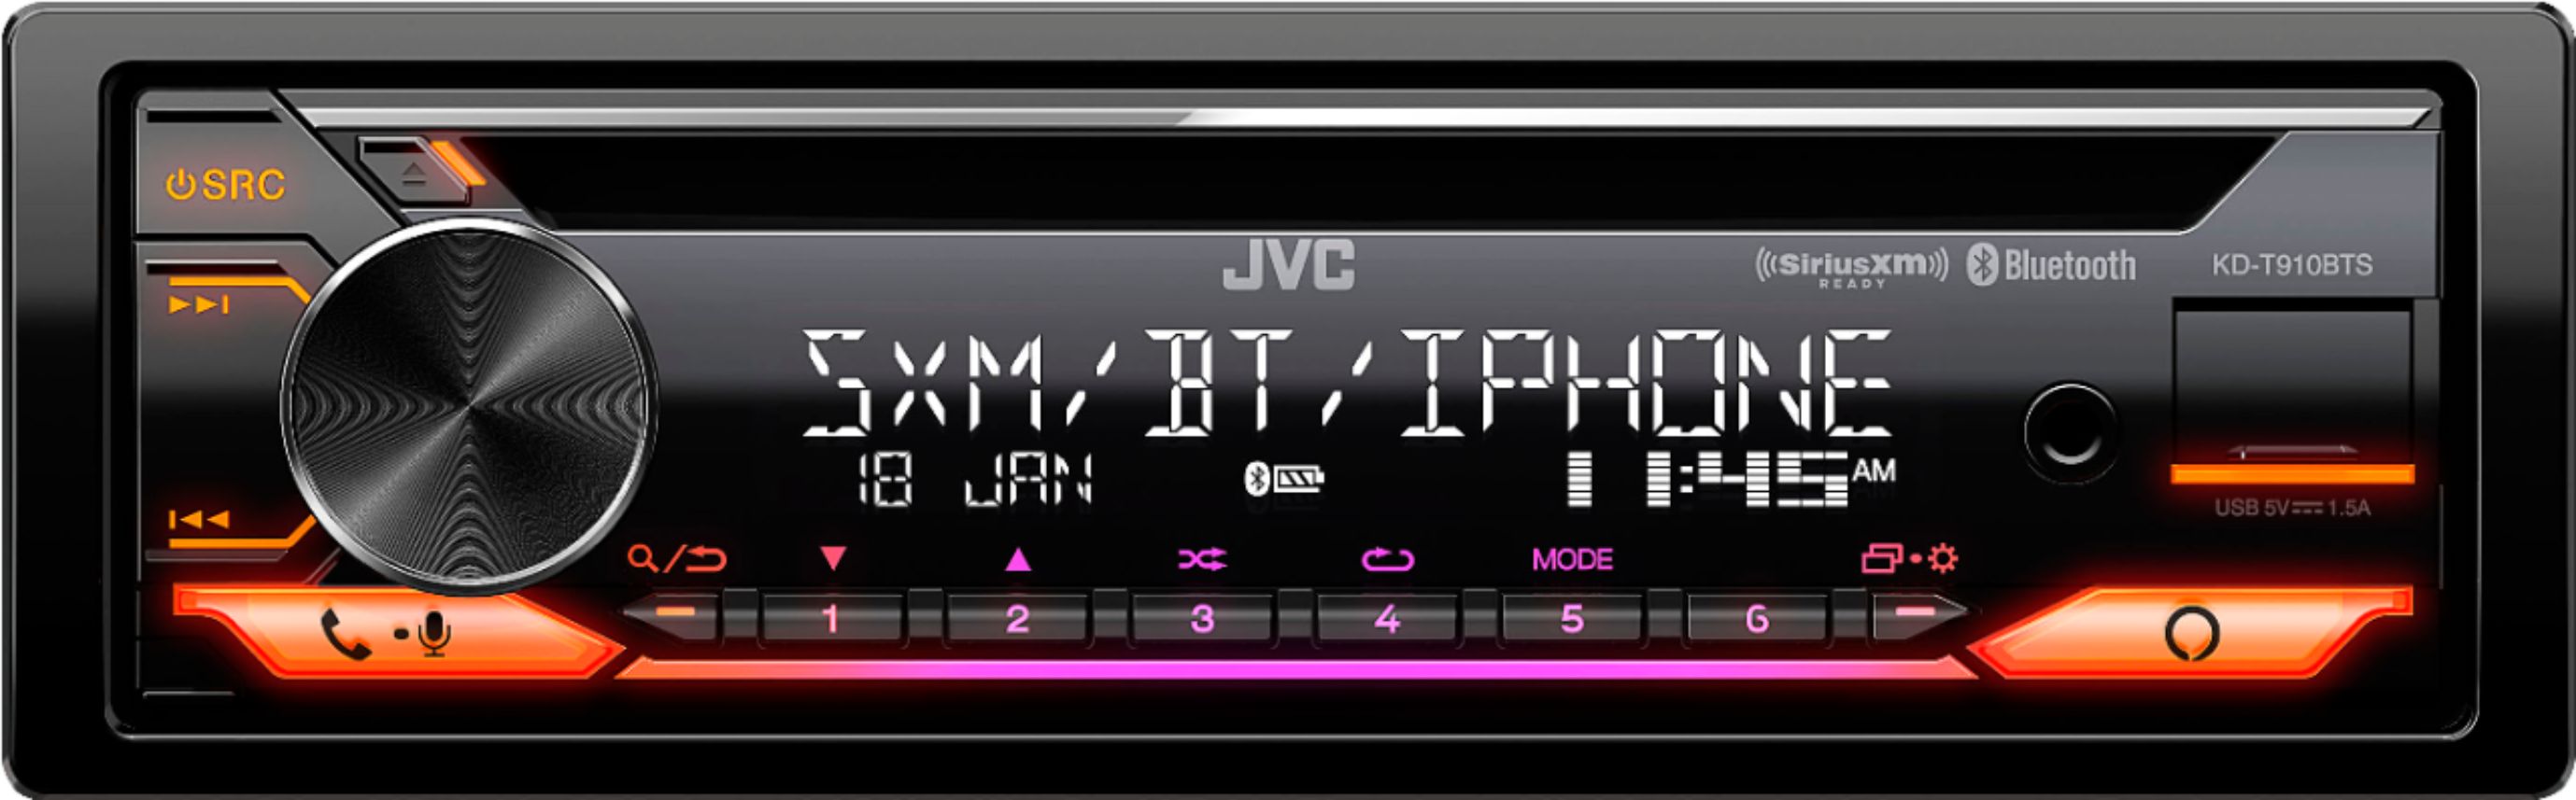 JVC - In-Dash CD/DM Receiver - Built-in Bluetooth - Satellite Radio-ready with Detachable Faceplate - Black